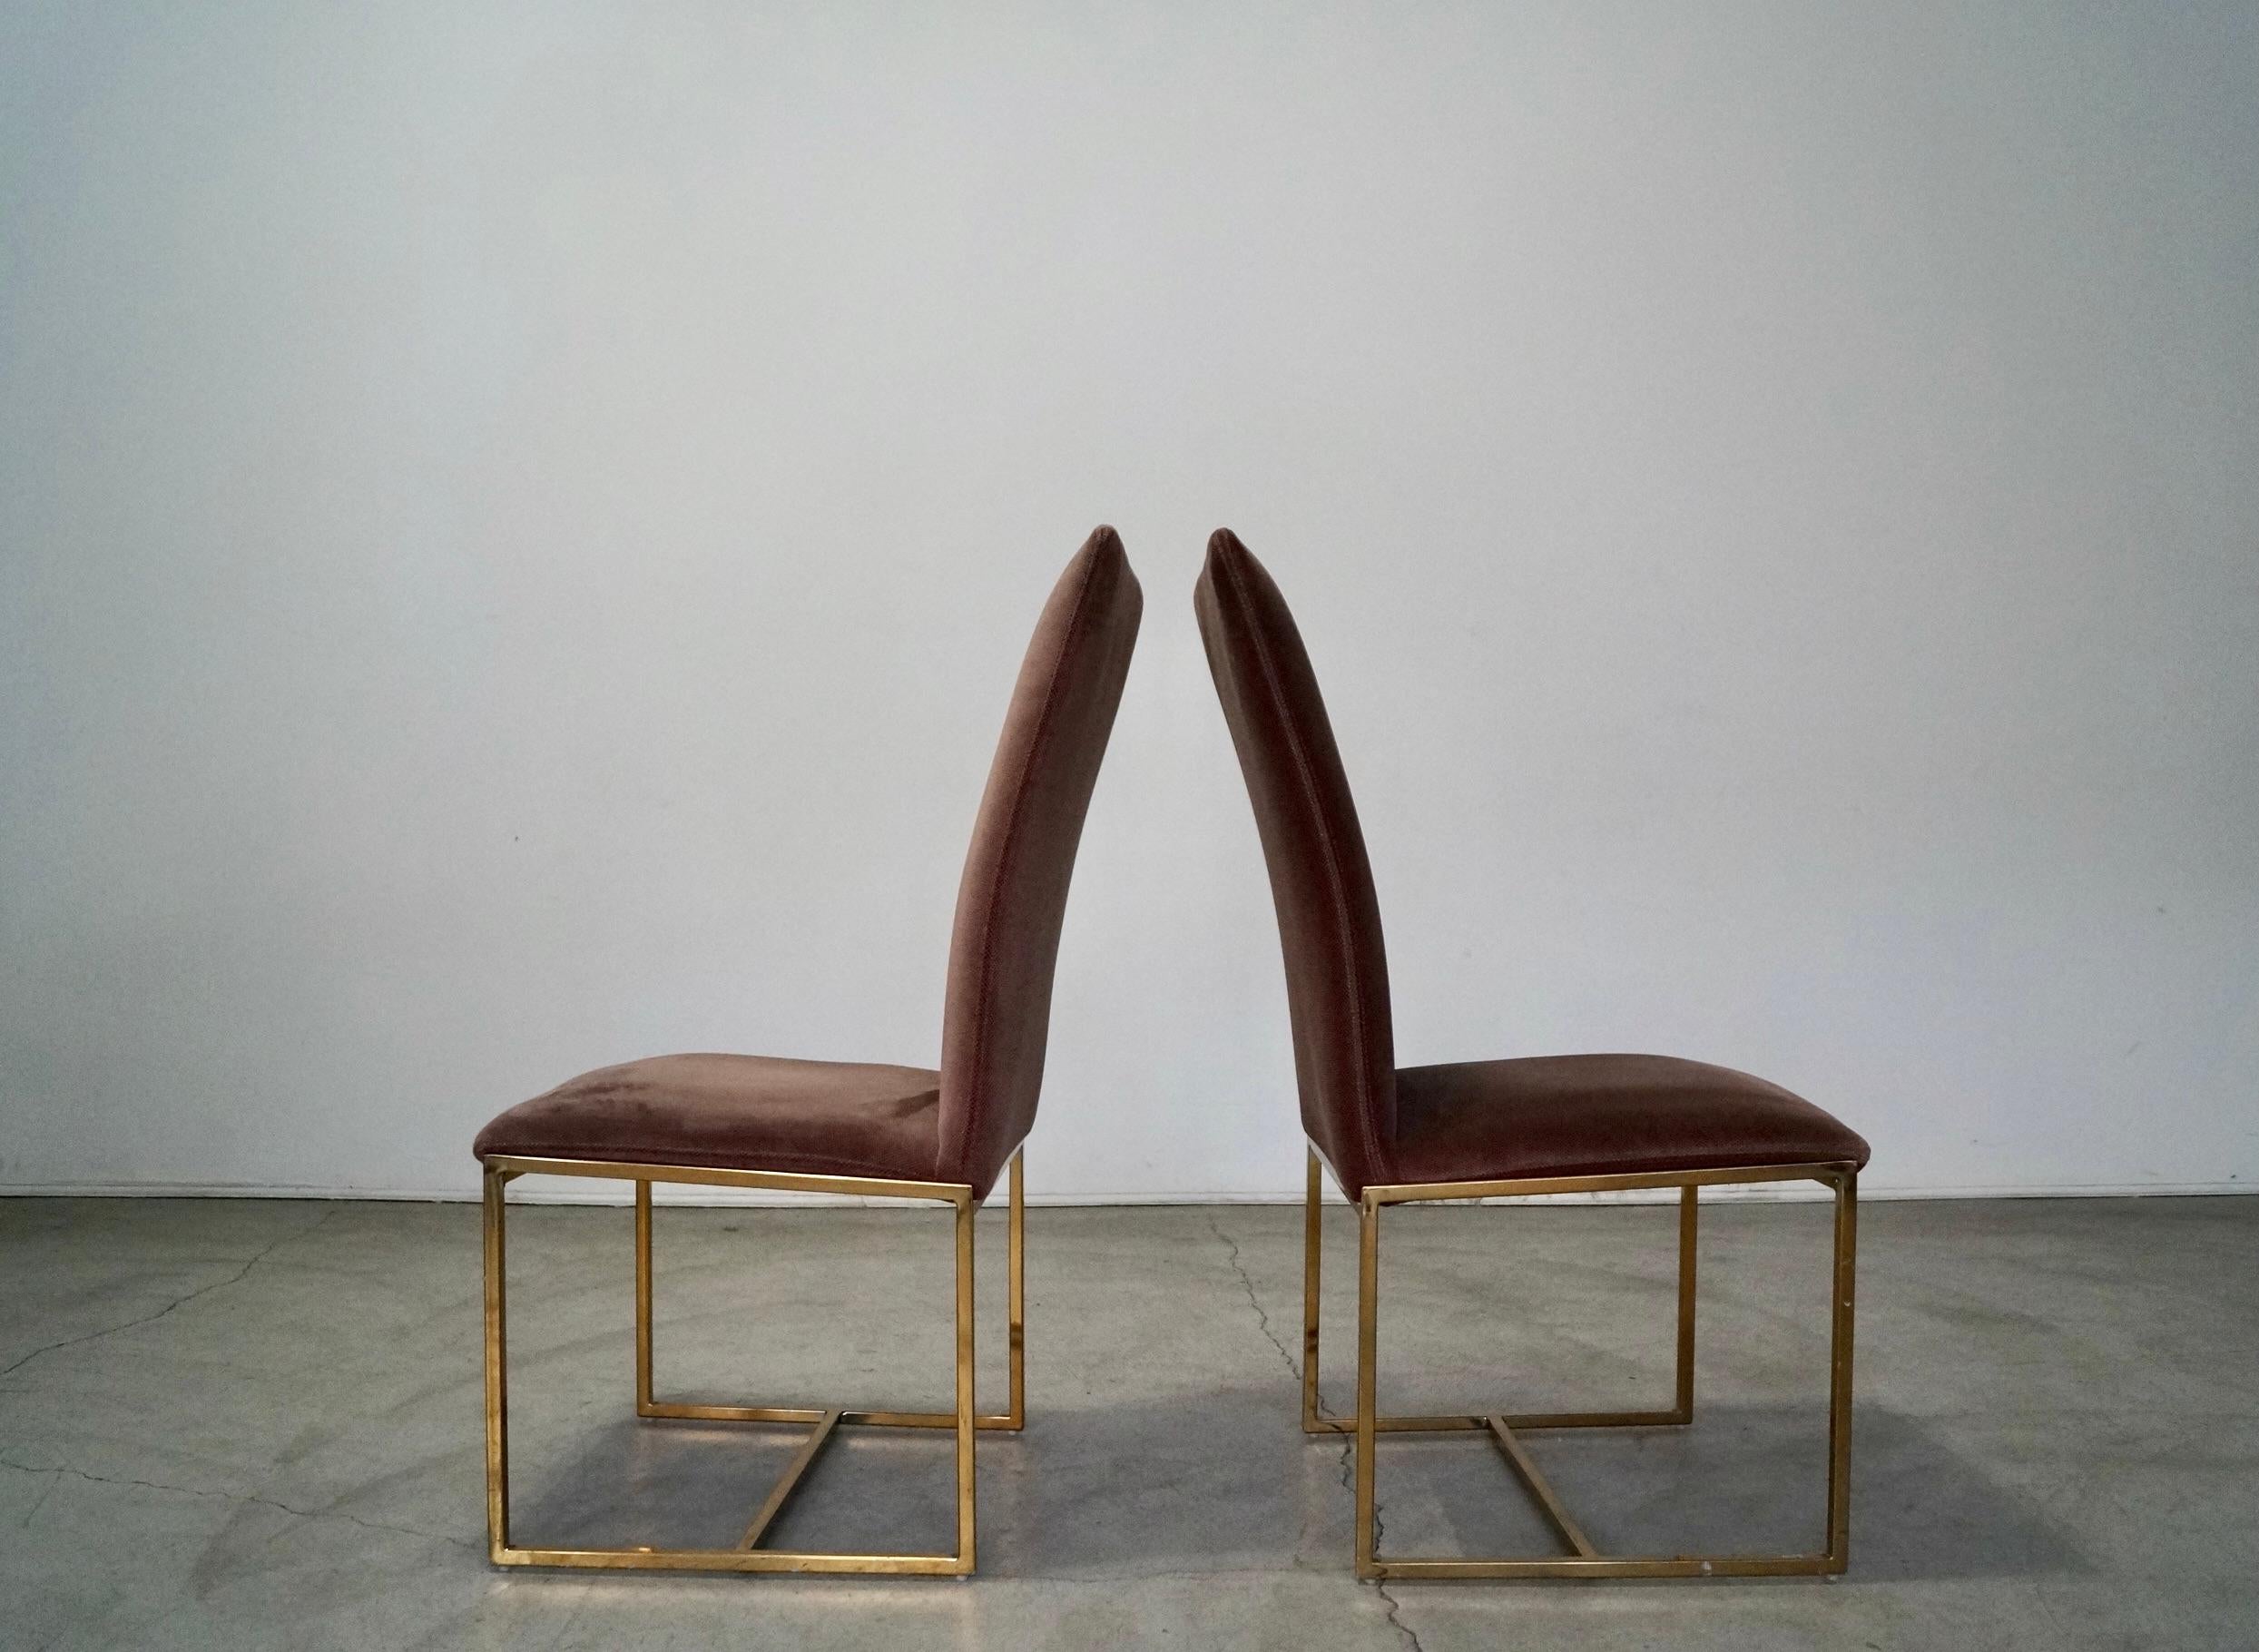 Late 20th Century 1970's Mid-Century Modern Milo Baughman Style Brass Dining Chairs - a Pair For Sale